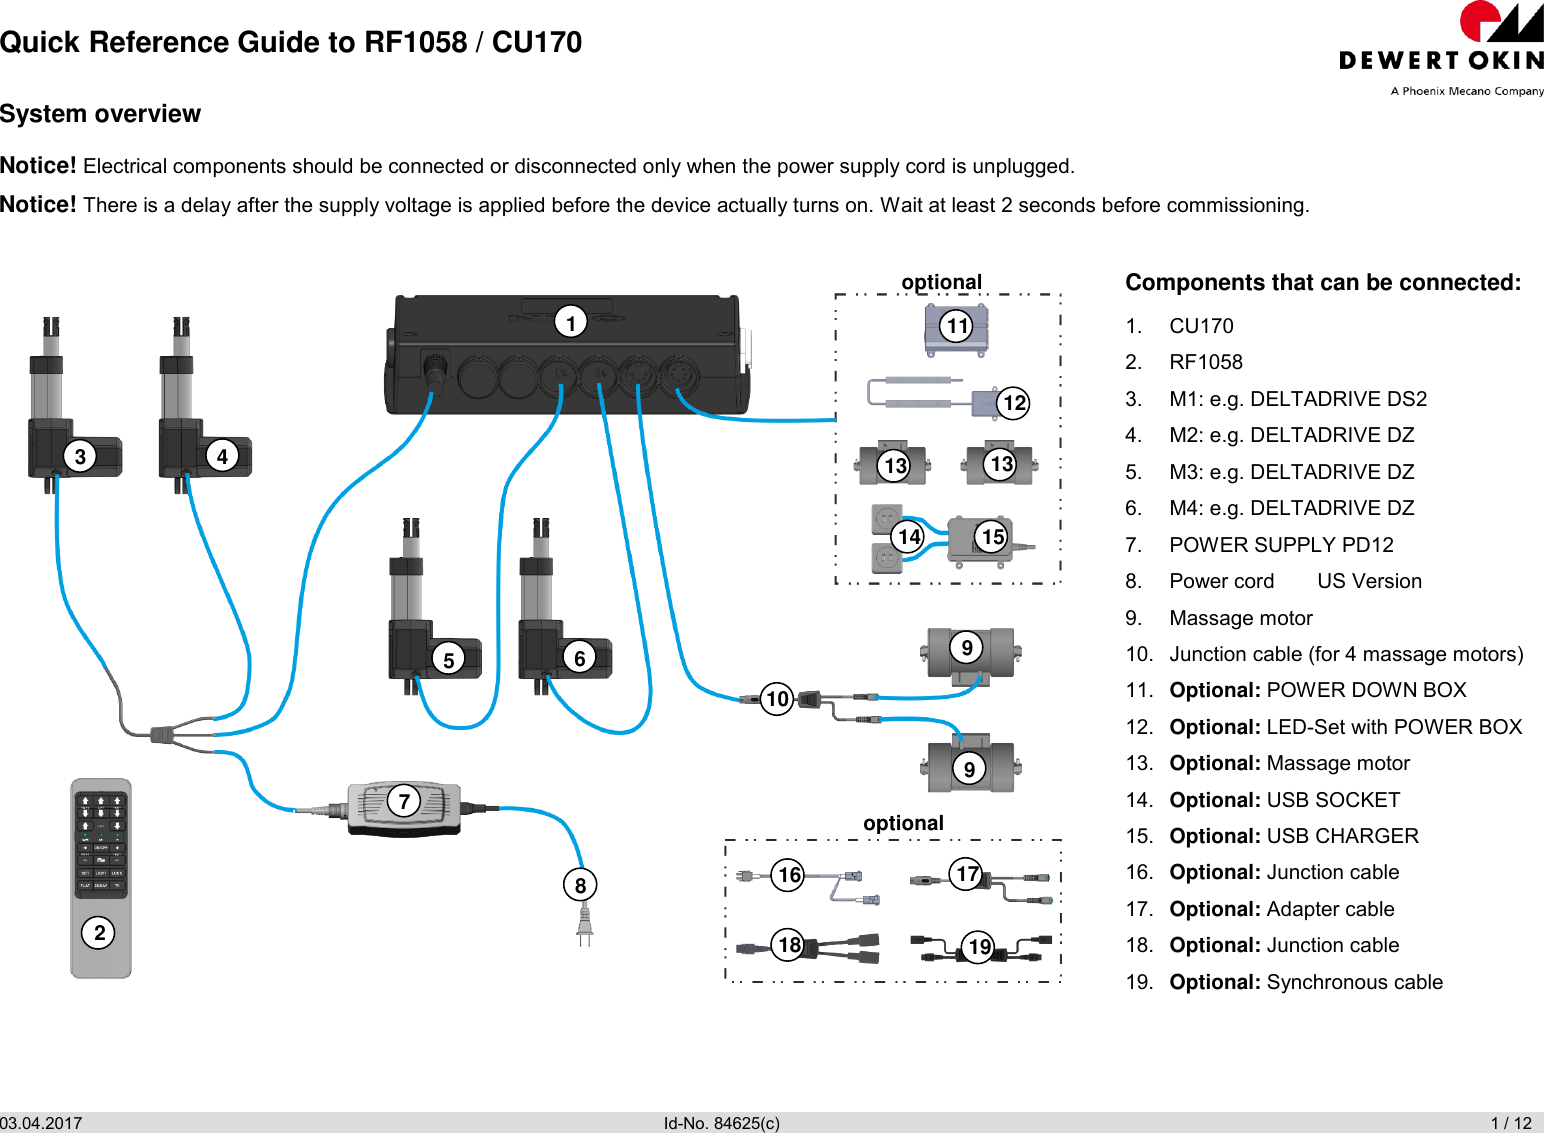 Quick Reference Guide to RF1058 / CU170 03.04.2017                Id-No. 84625(c)                       1 / 12  System overview Notice! Electrical components should be connected or disconnected only when the power supply cord is unplugged. Notice! There is a delay after the supply voltage is applied before the device actually turns on. Wait at least 2 seconds before commissioning.  Components that can be connected: 1.  CU170 2. RF1058 3. M1: e.g. DELTADRIVE DS2 4. M2: e.g. DELTADRIVE DZ 5. M3: e.g. DELTADRIVE DZ 6. M4: e.g. DELTADRIVE DZ 7.  POWER SUPPLY PD12 8.  Power cord   US Version 9.  Massage motor  10.  Junction cable (for 4 massage motors) 11. Optional: POWER DOWN BOX 12. Optional: LED-Set with POWER BOX  13. Optional: Massage motor 14. Optional: USB SOCKET 15. Optional: USB CHARGER 16. Optional: Junction cable 17. Optional: Adapter cable 18. Optional: Junction cable 19. Optional: Synchronous cable optional optional 7 1 8 6 5 9 2 3 12 13 4 10 11 16 14 9 13 15 17 18 19 